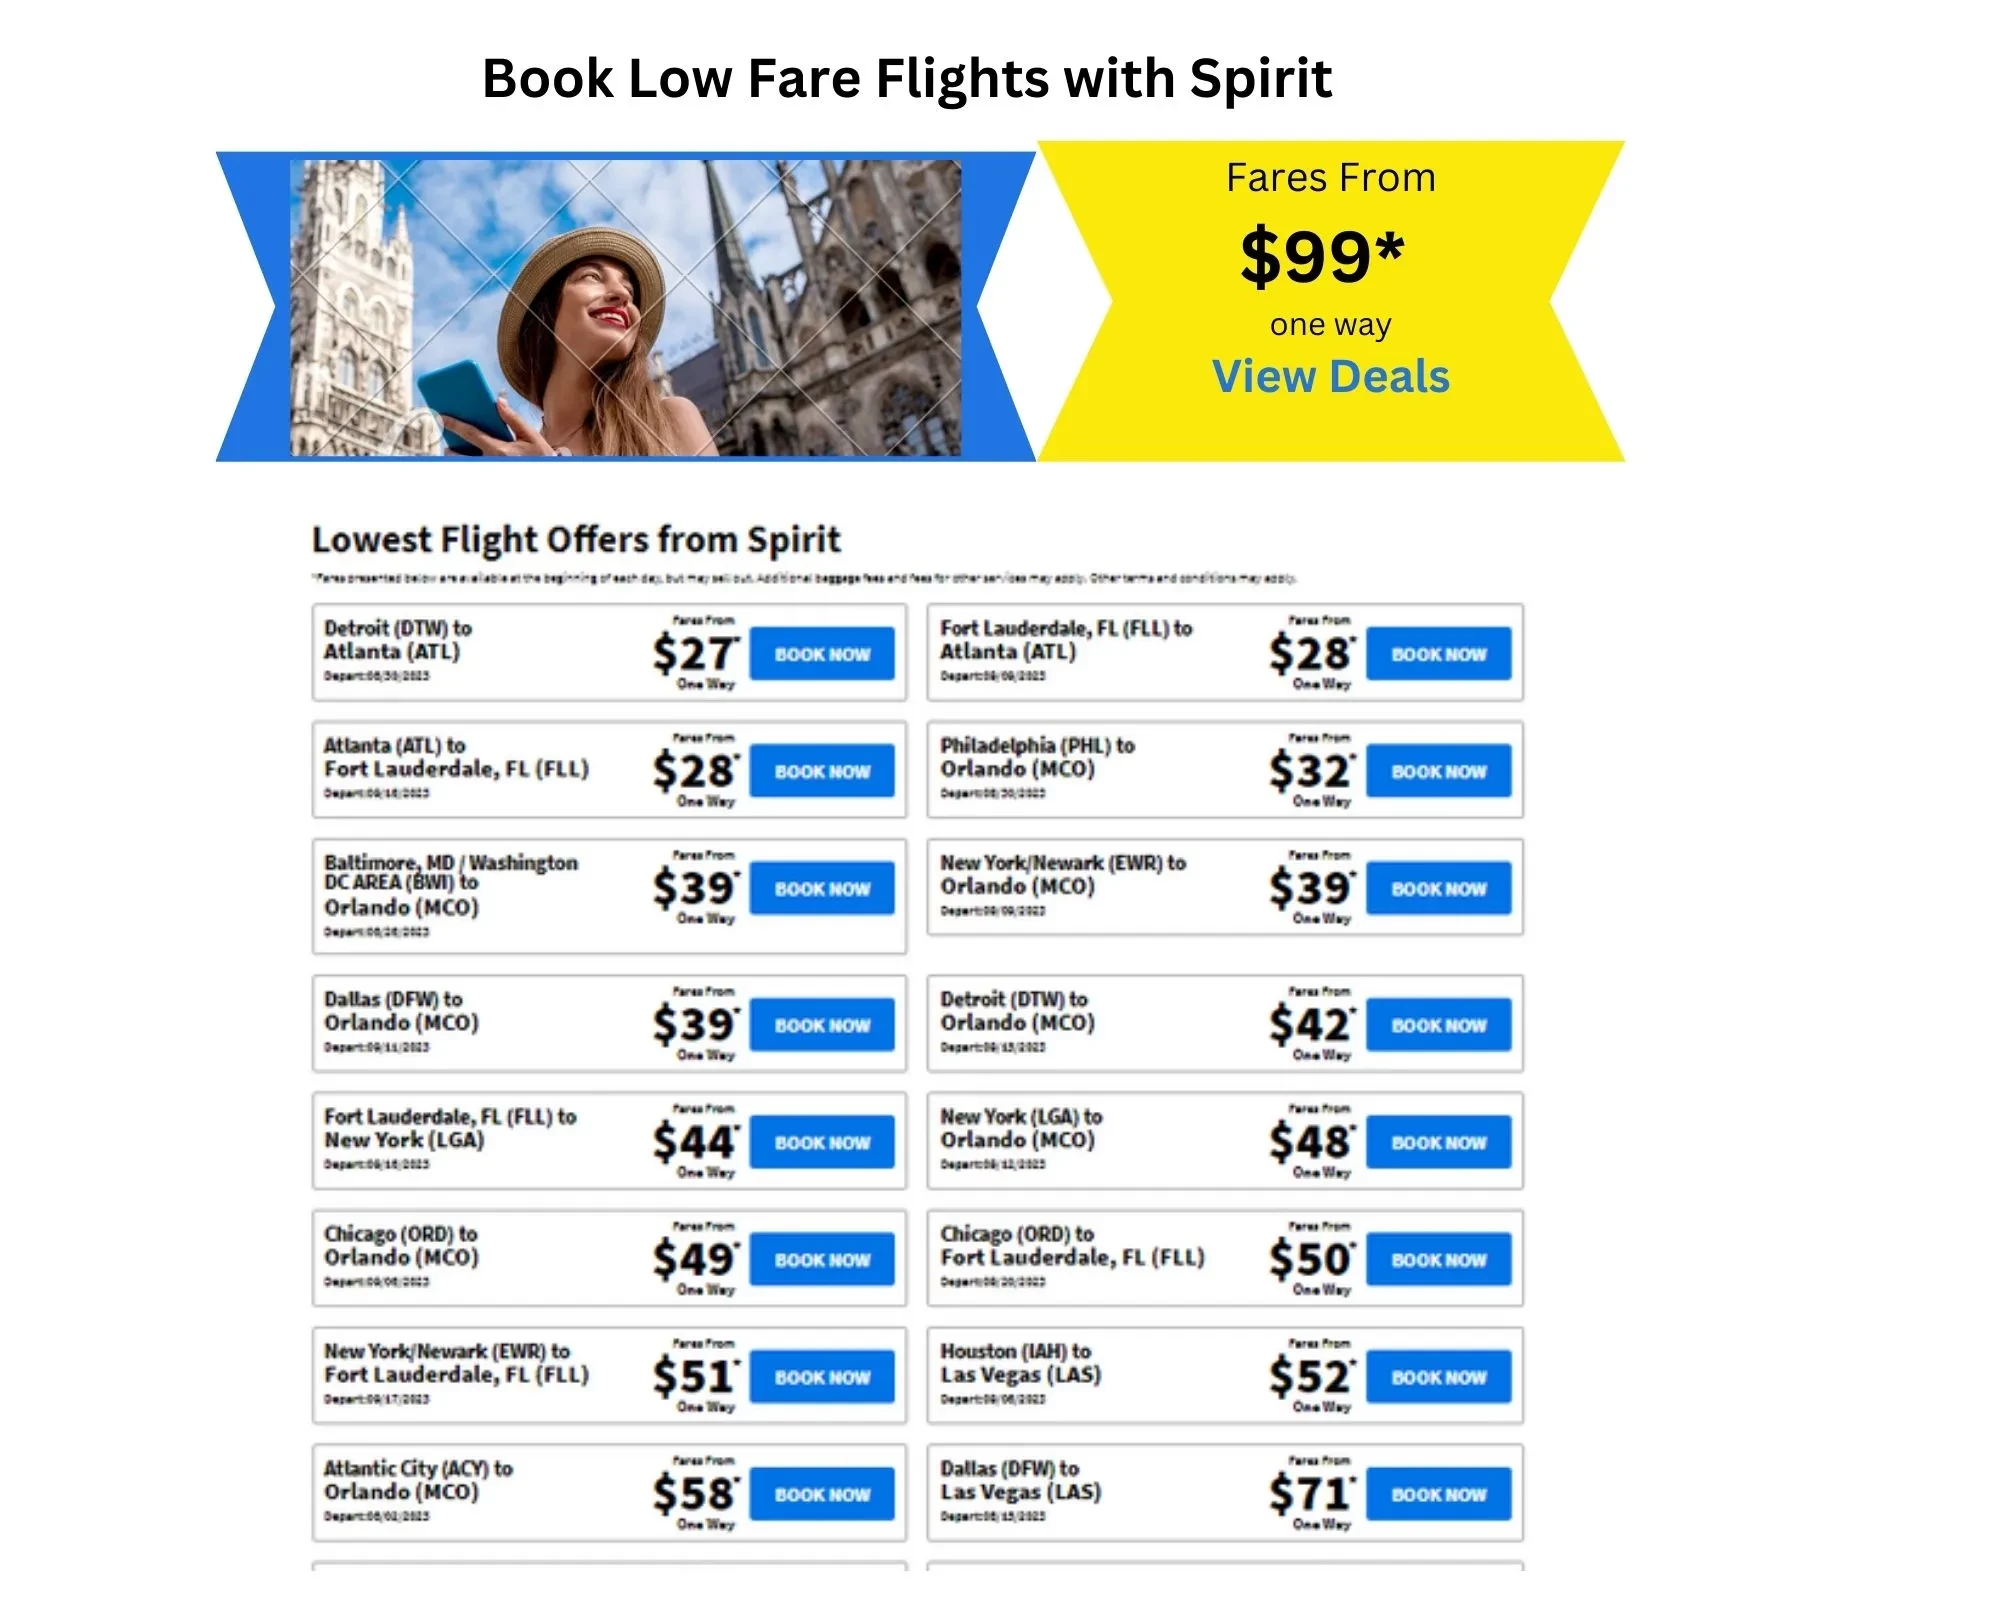 Spirit Airlines Offers $99 Flights to Select Destinations